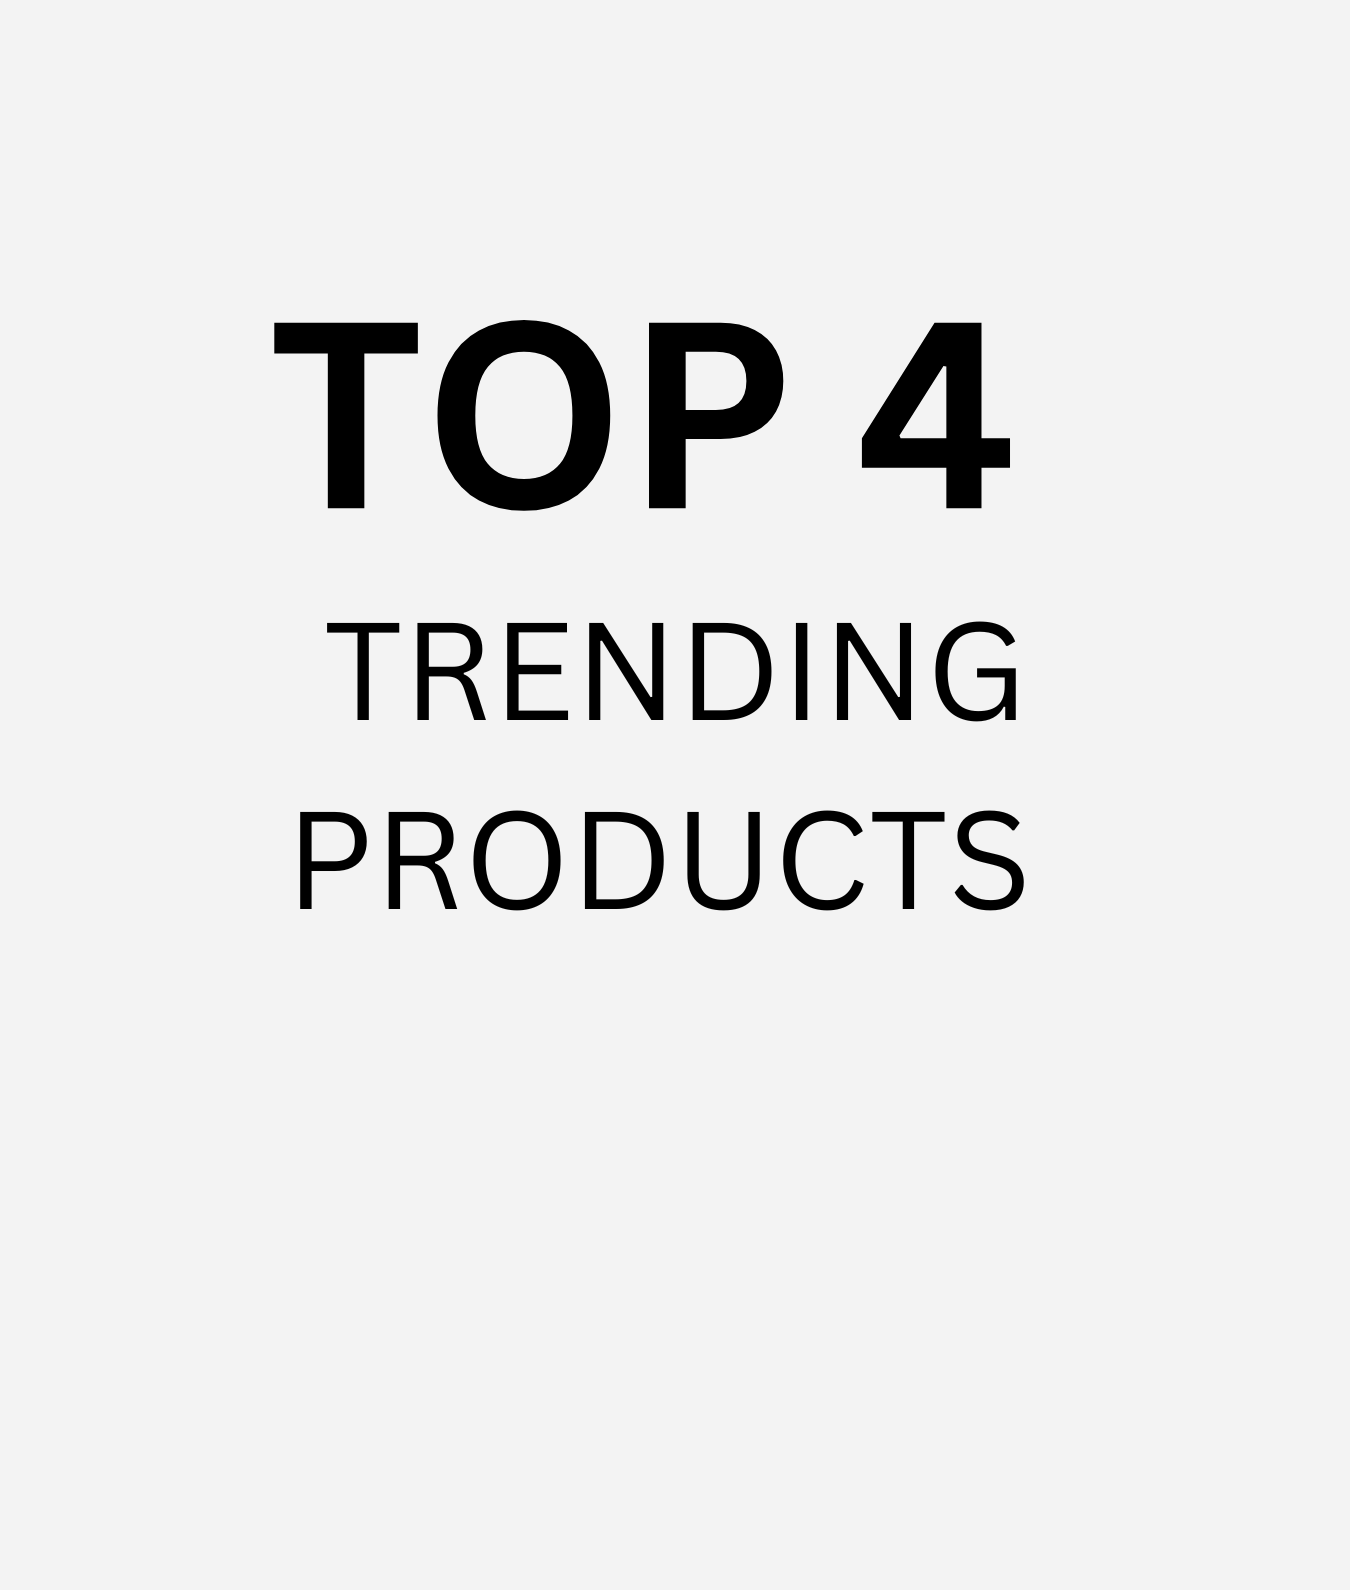 Our 4 Most Selling Products